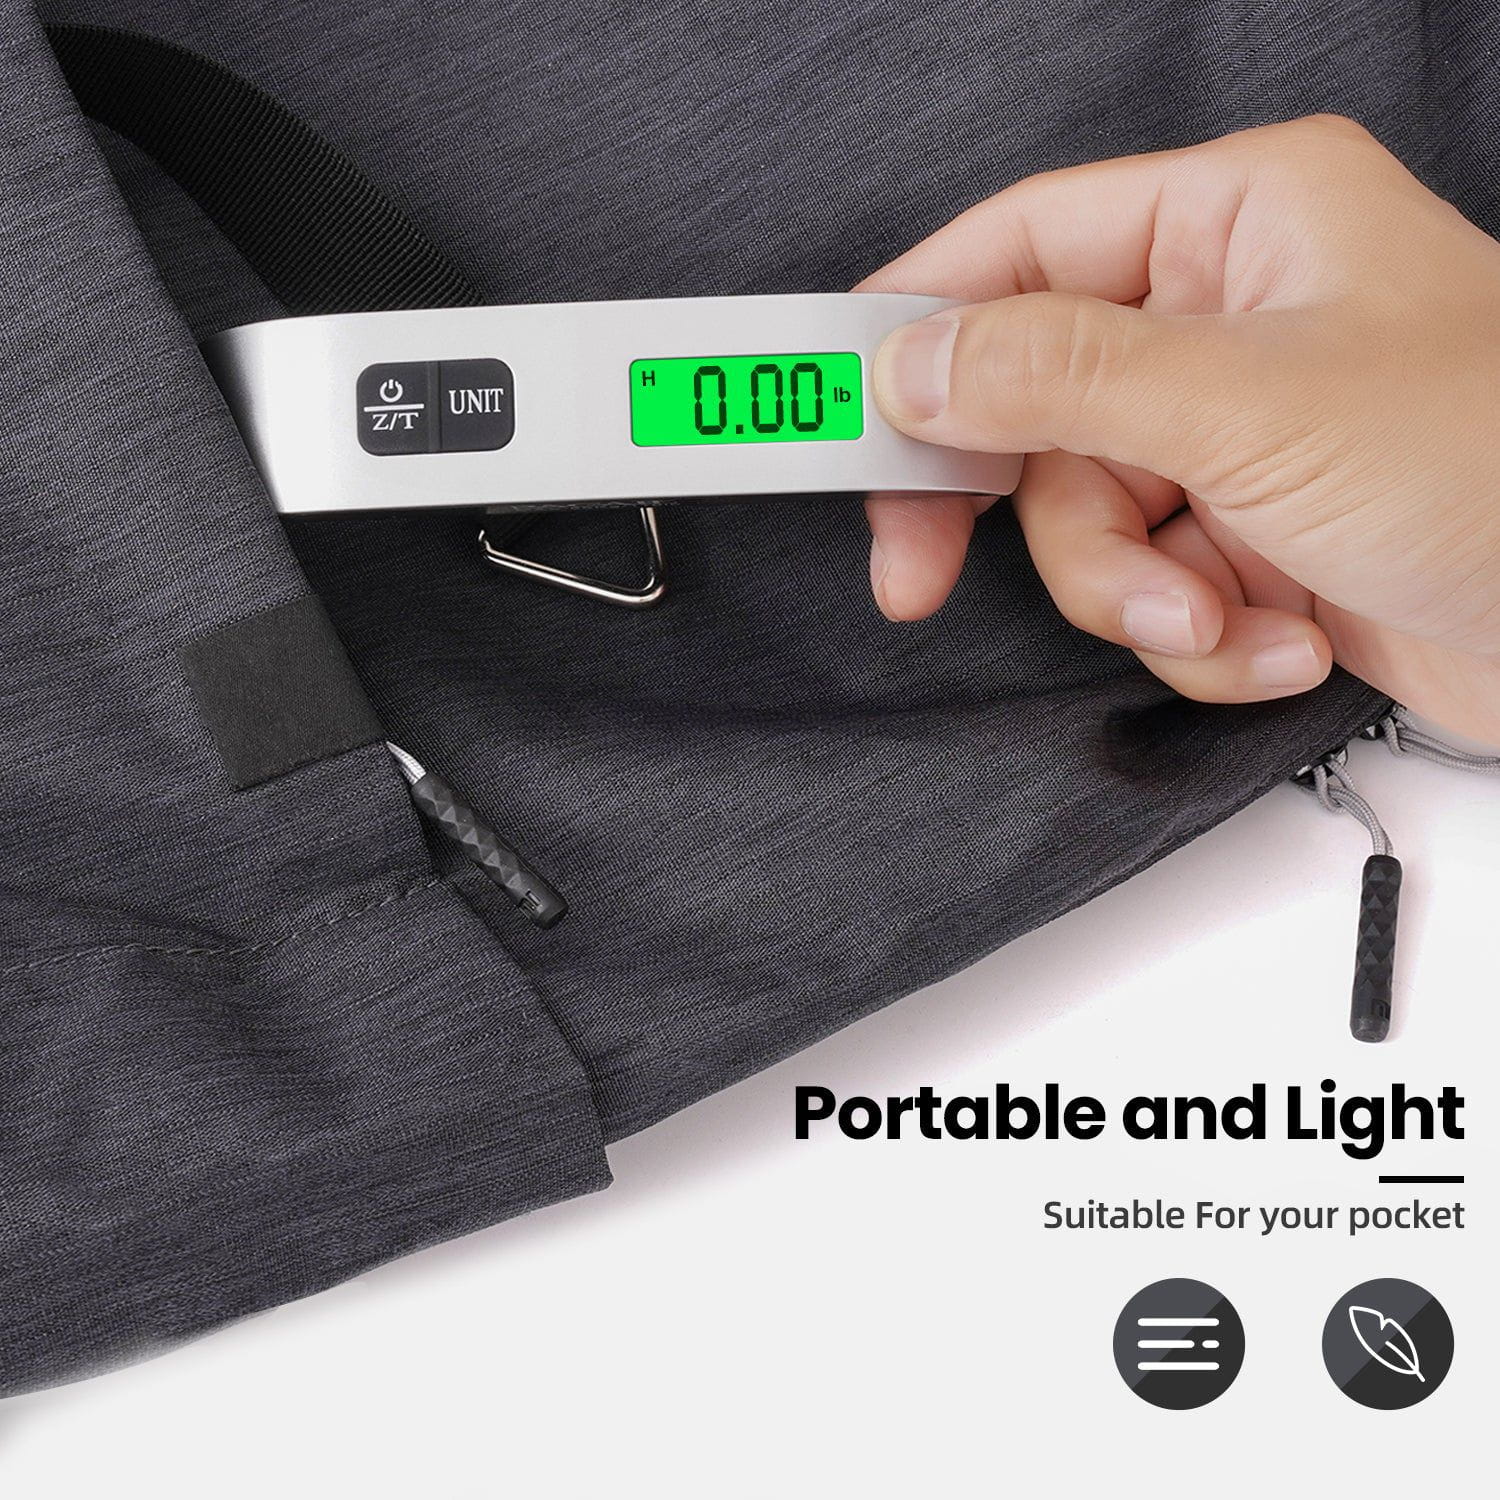 Digital Luggage Scale With LCD Display - SG 2415 - IdeaStage